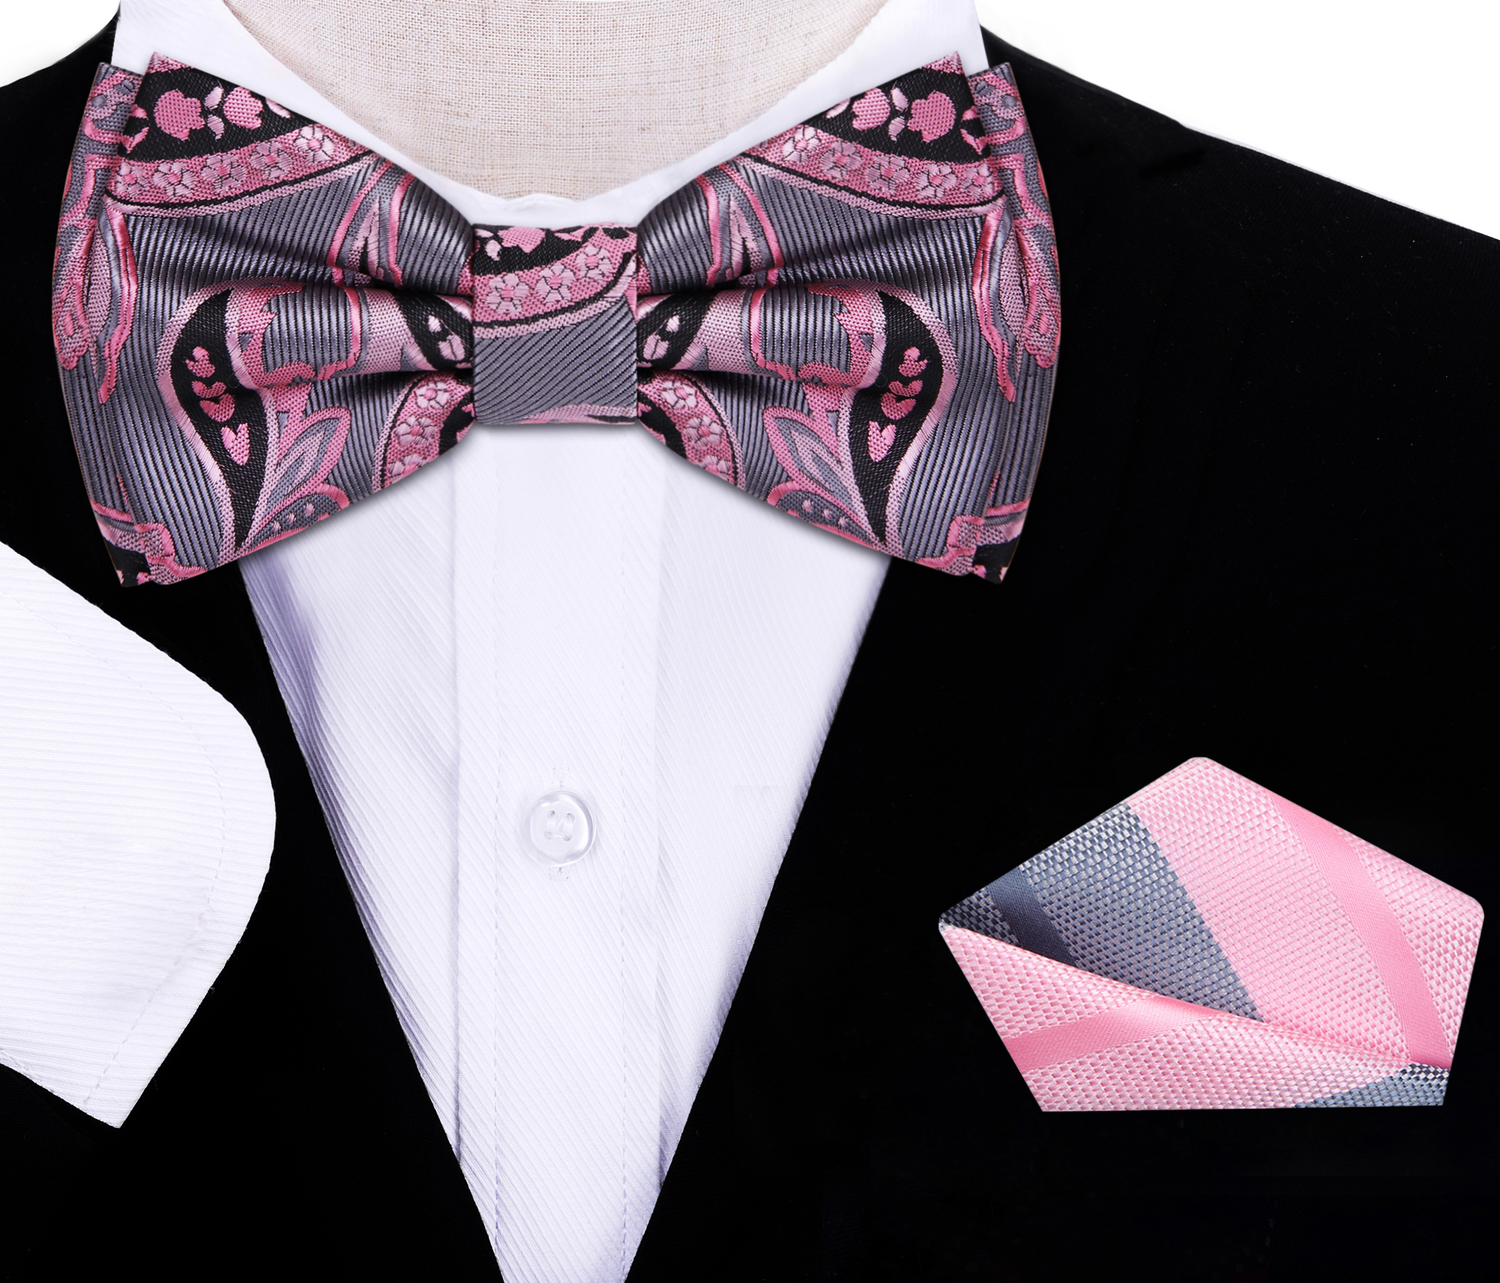 Silver, Pink and Black Paisley Bow Tie and Accenting Pink, Grey Stripe Pocket Square